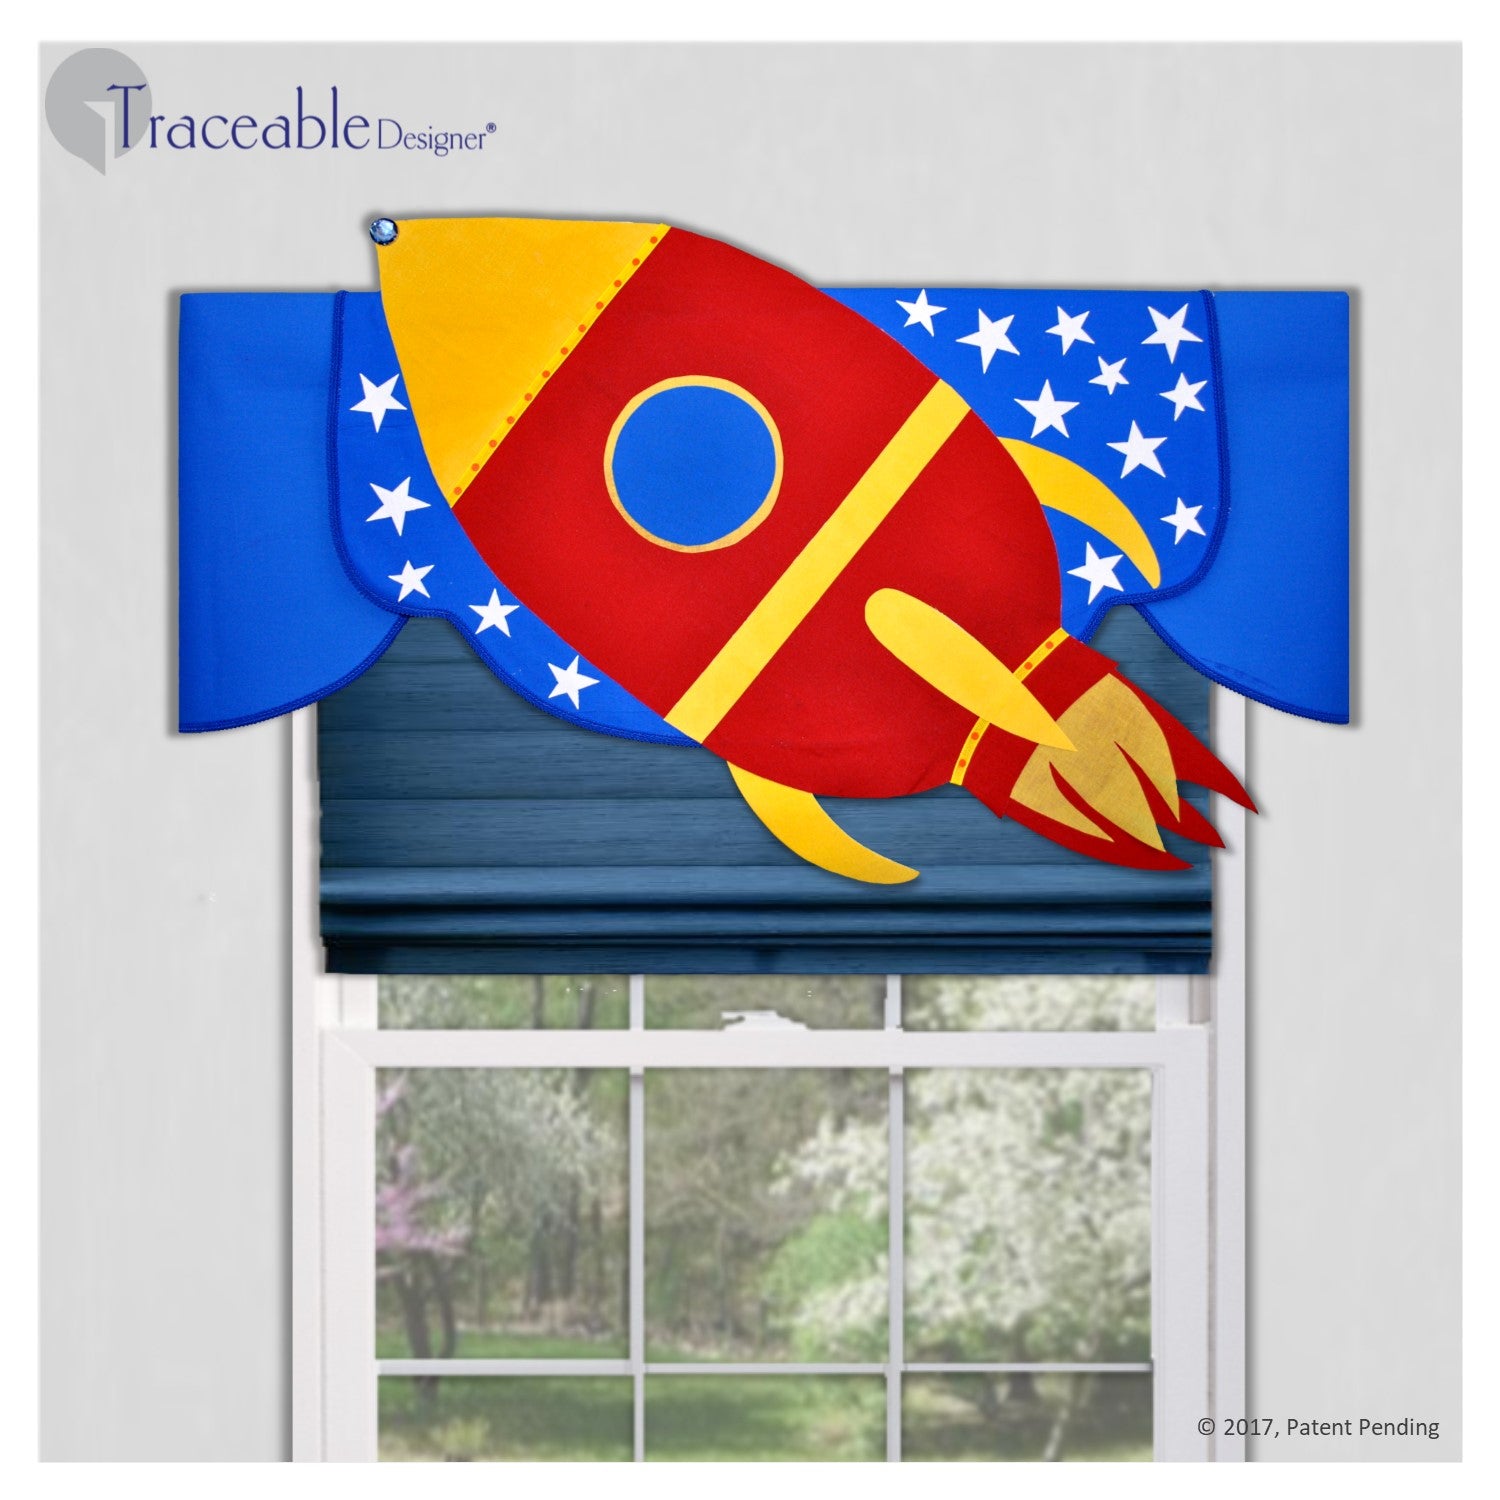 Unique boys 3D rocket valance, DIY no sewing, kit also includes submarine, airplane and sailboat window treatment styles.  Designed by Linda Schurr